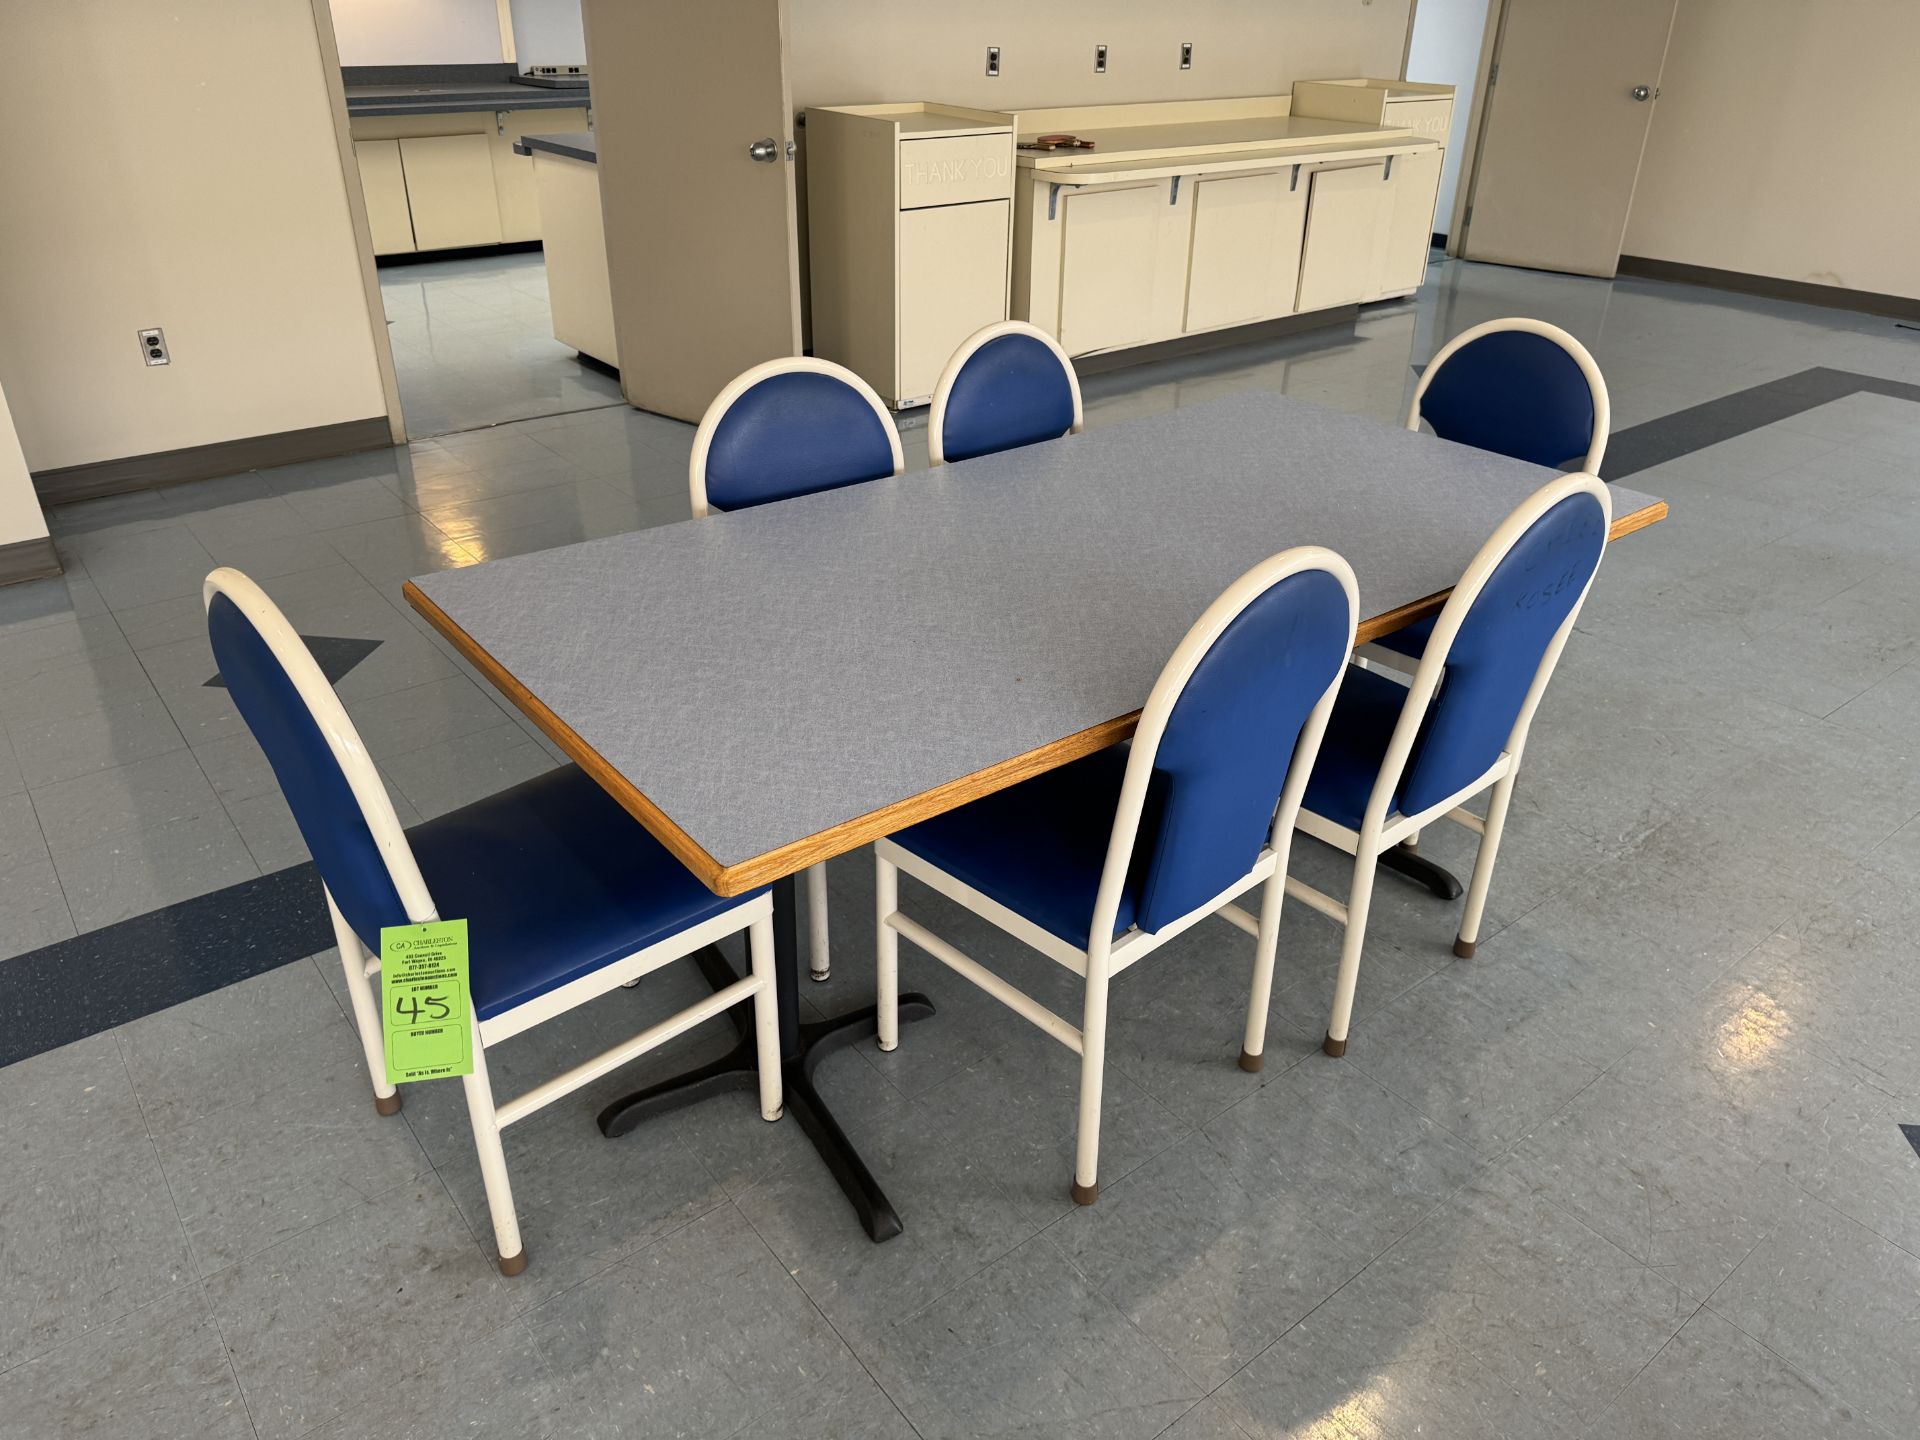 DINING TABLE WITH (6) CHAIRS (ZONE 3)